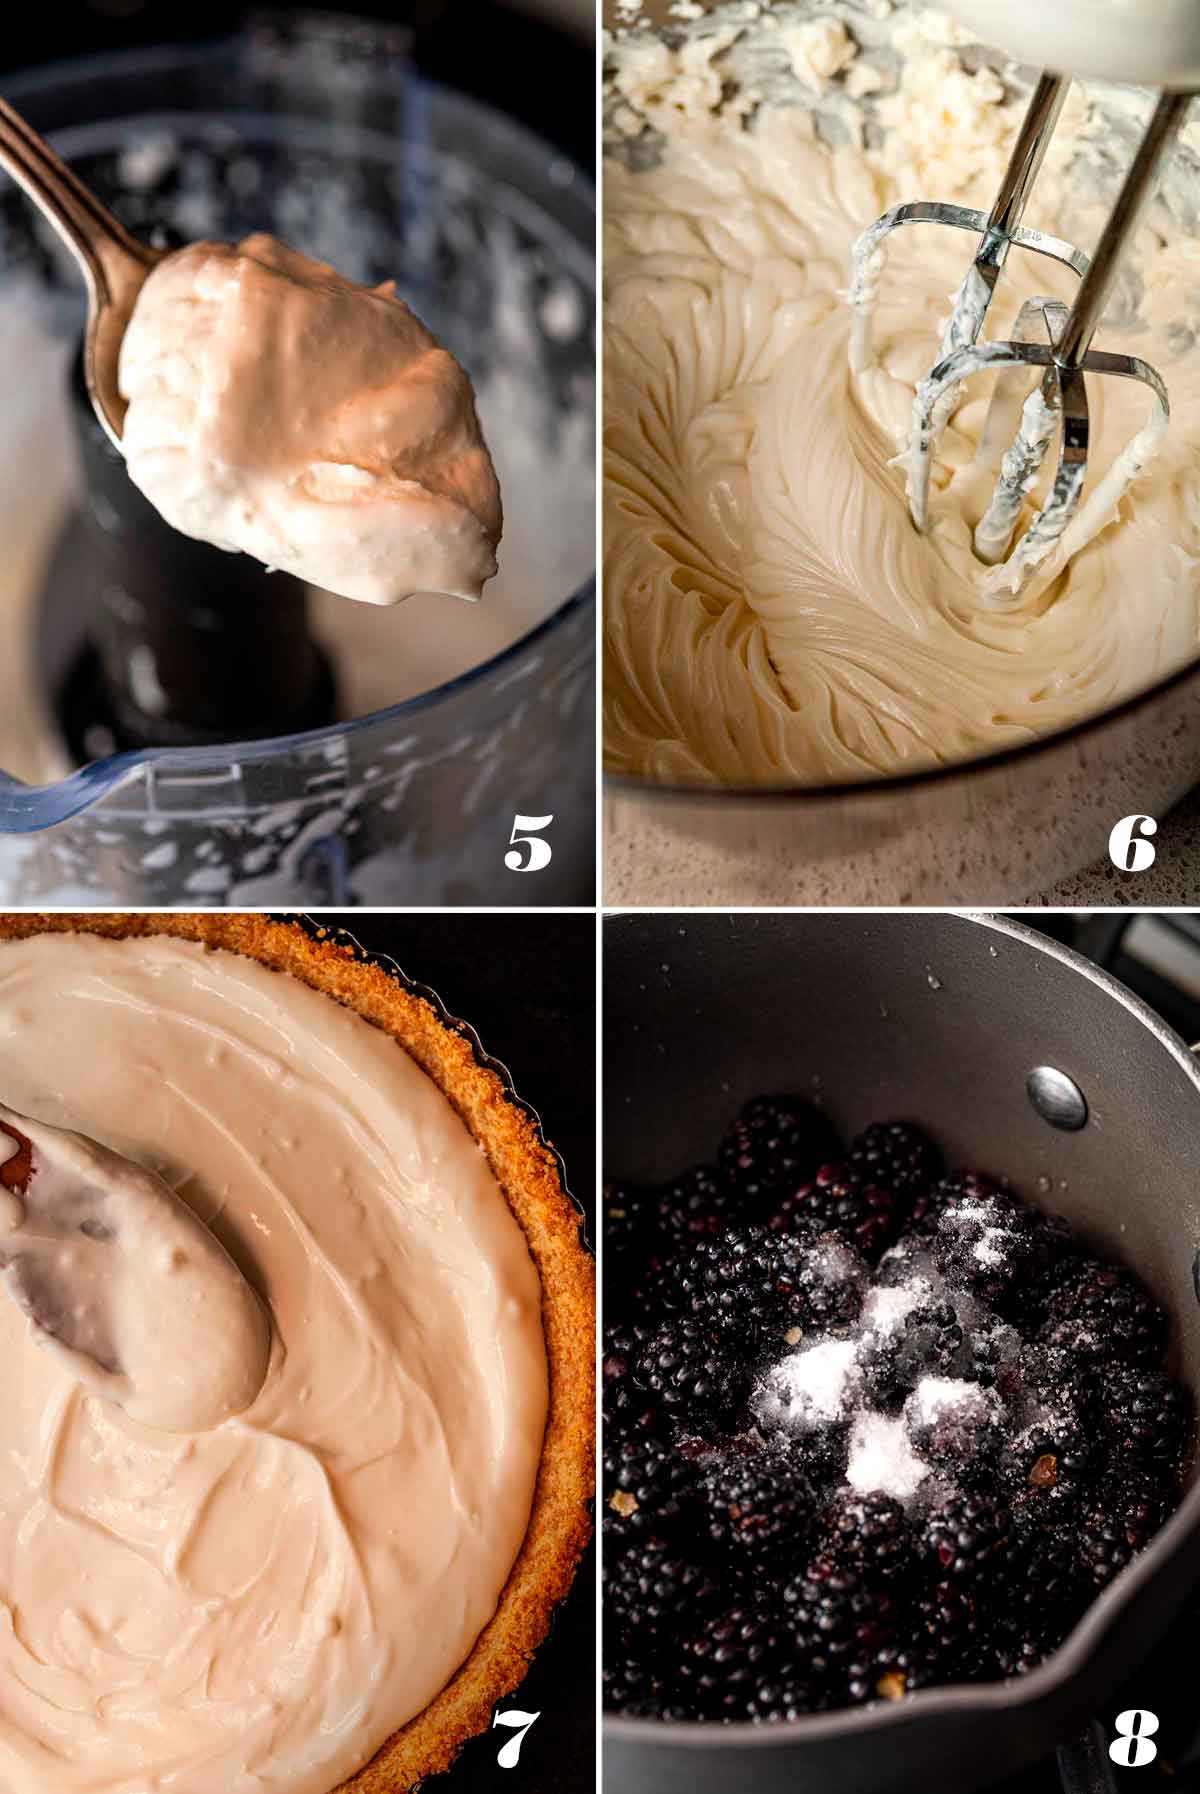 A collage of 4 numbered images showing how to make cheesecake and compote.